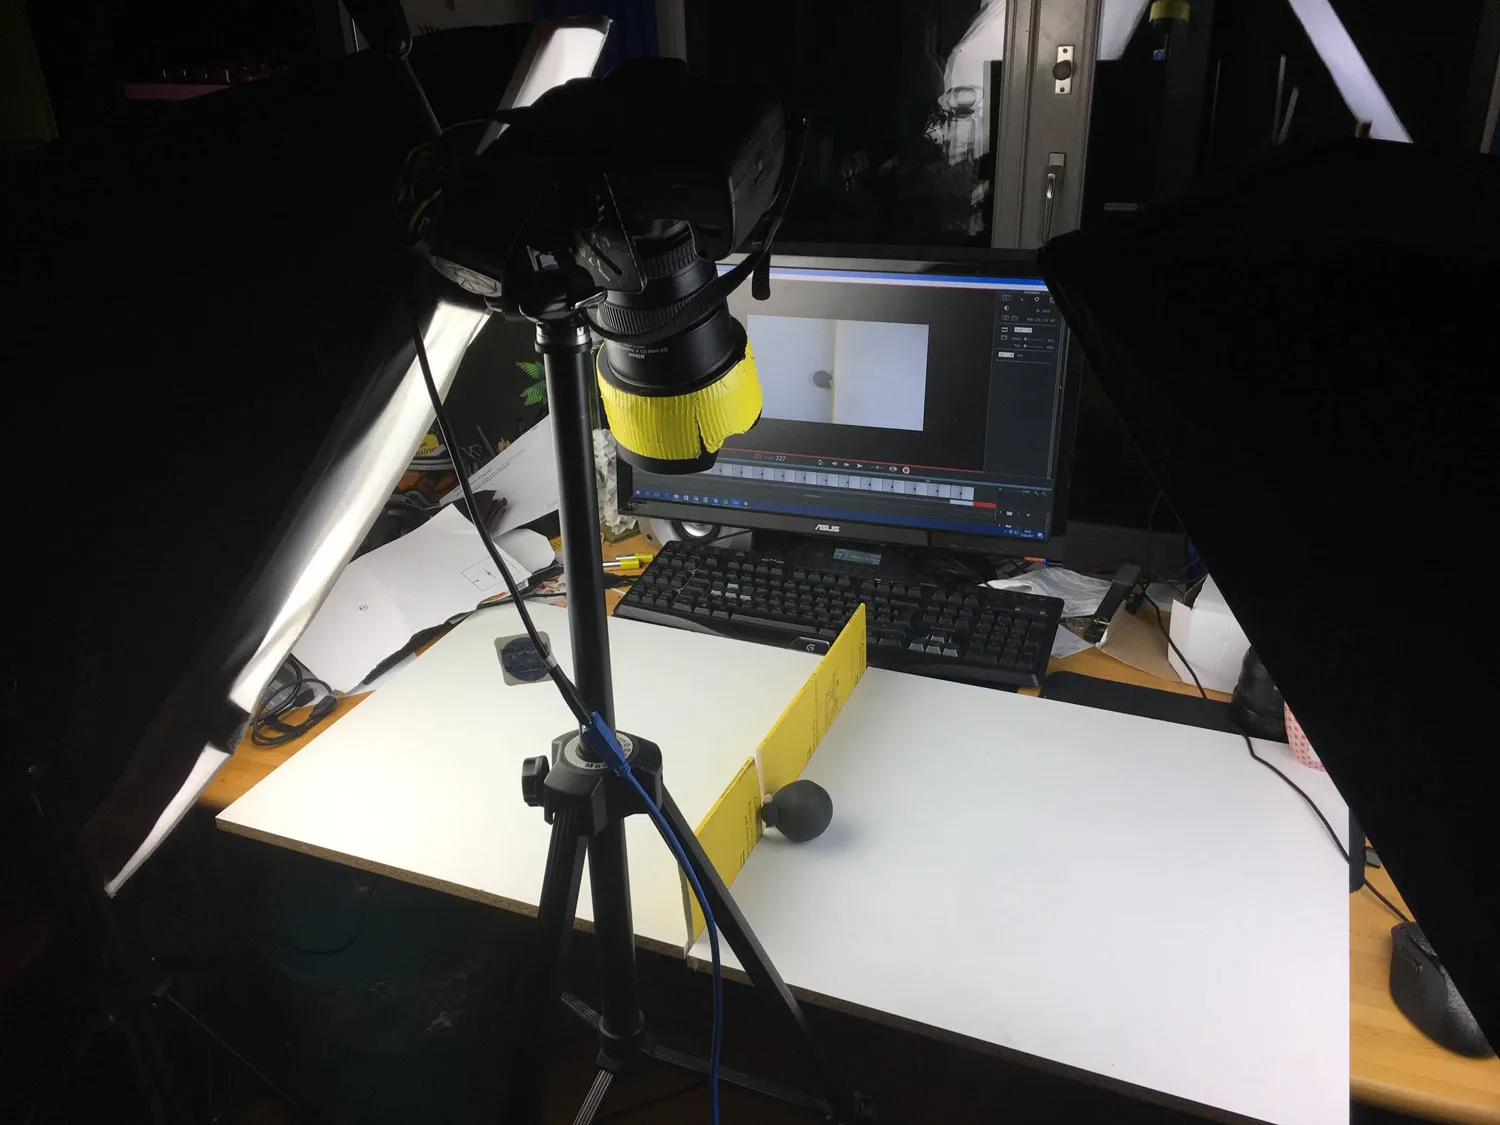 Camera, computer, and softboxes